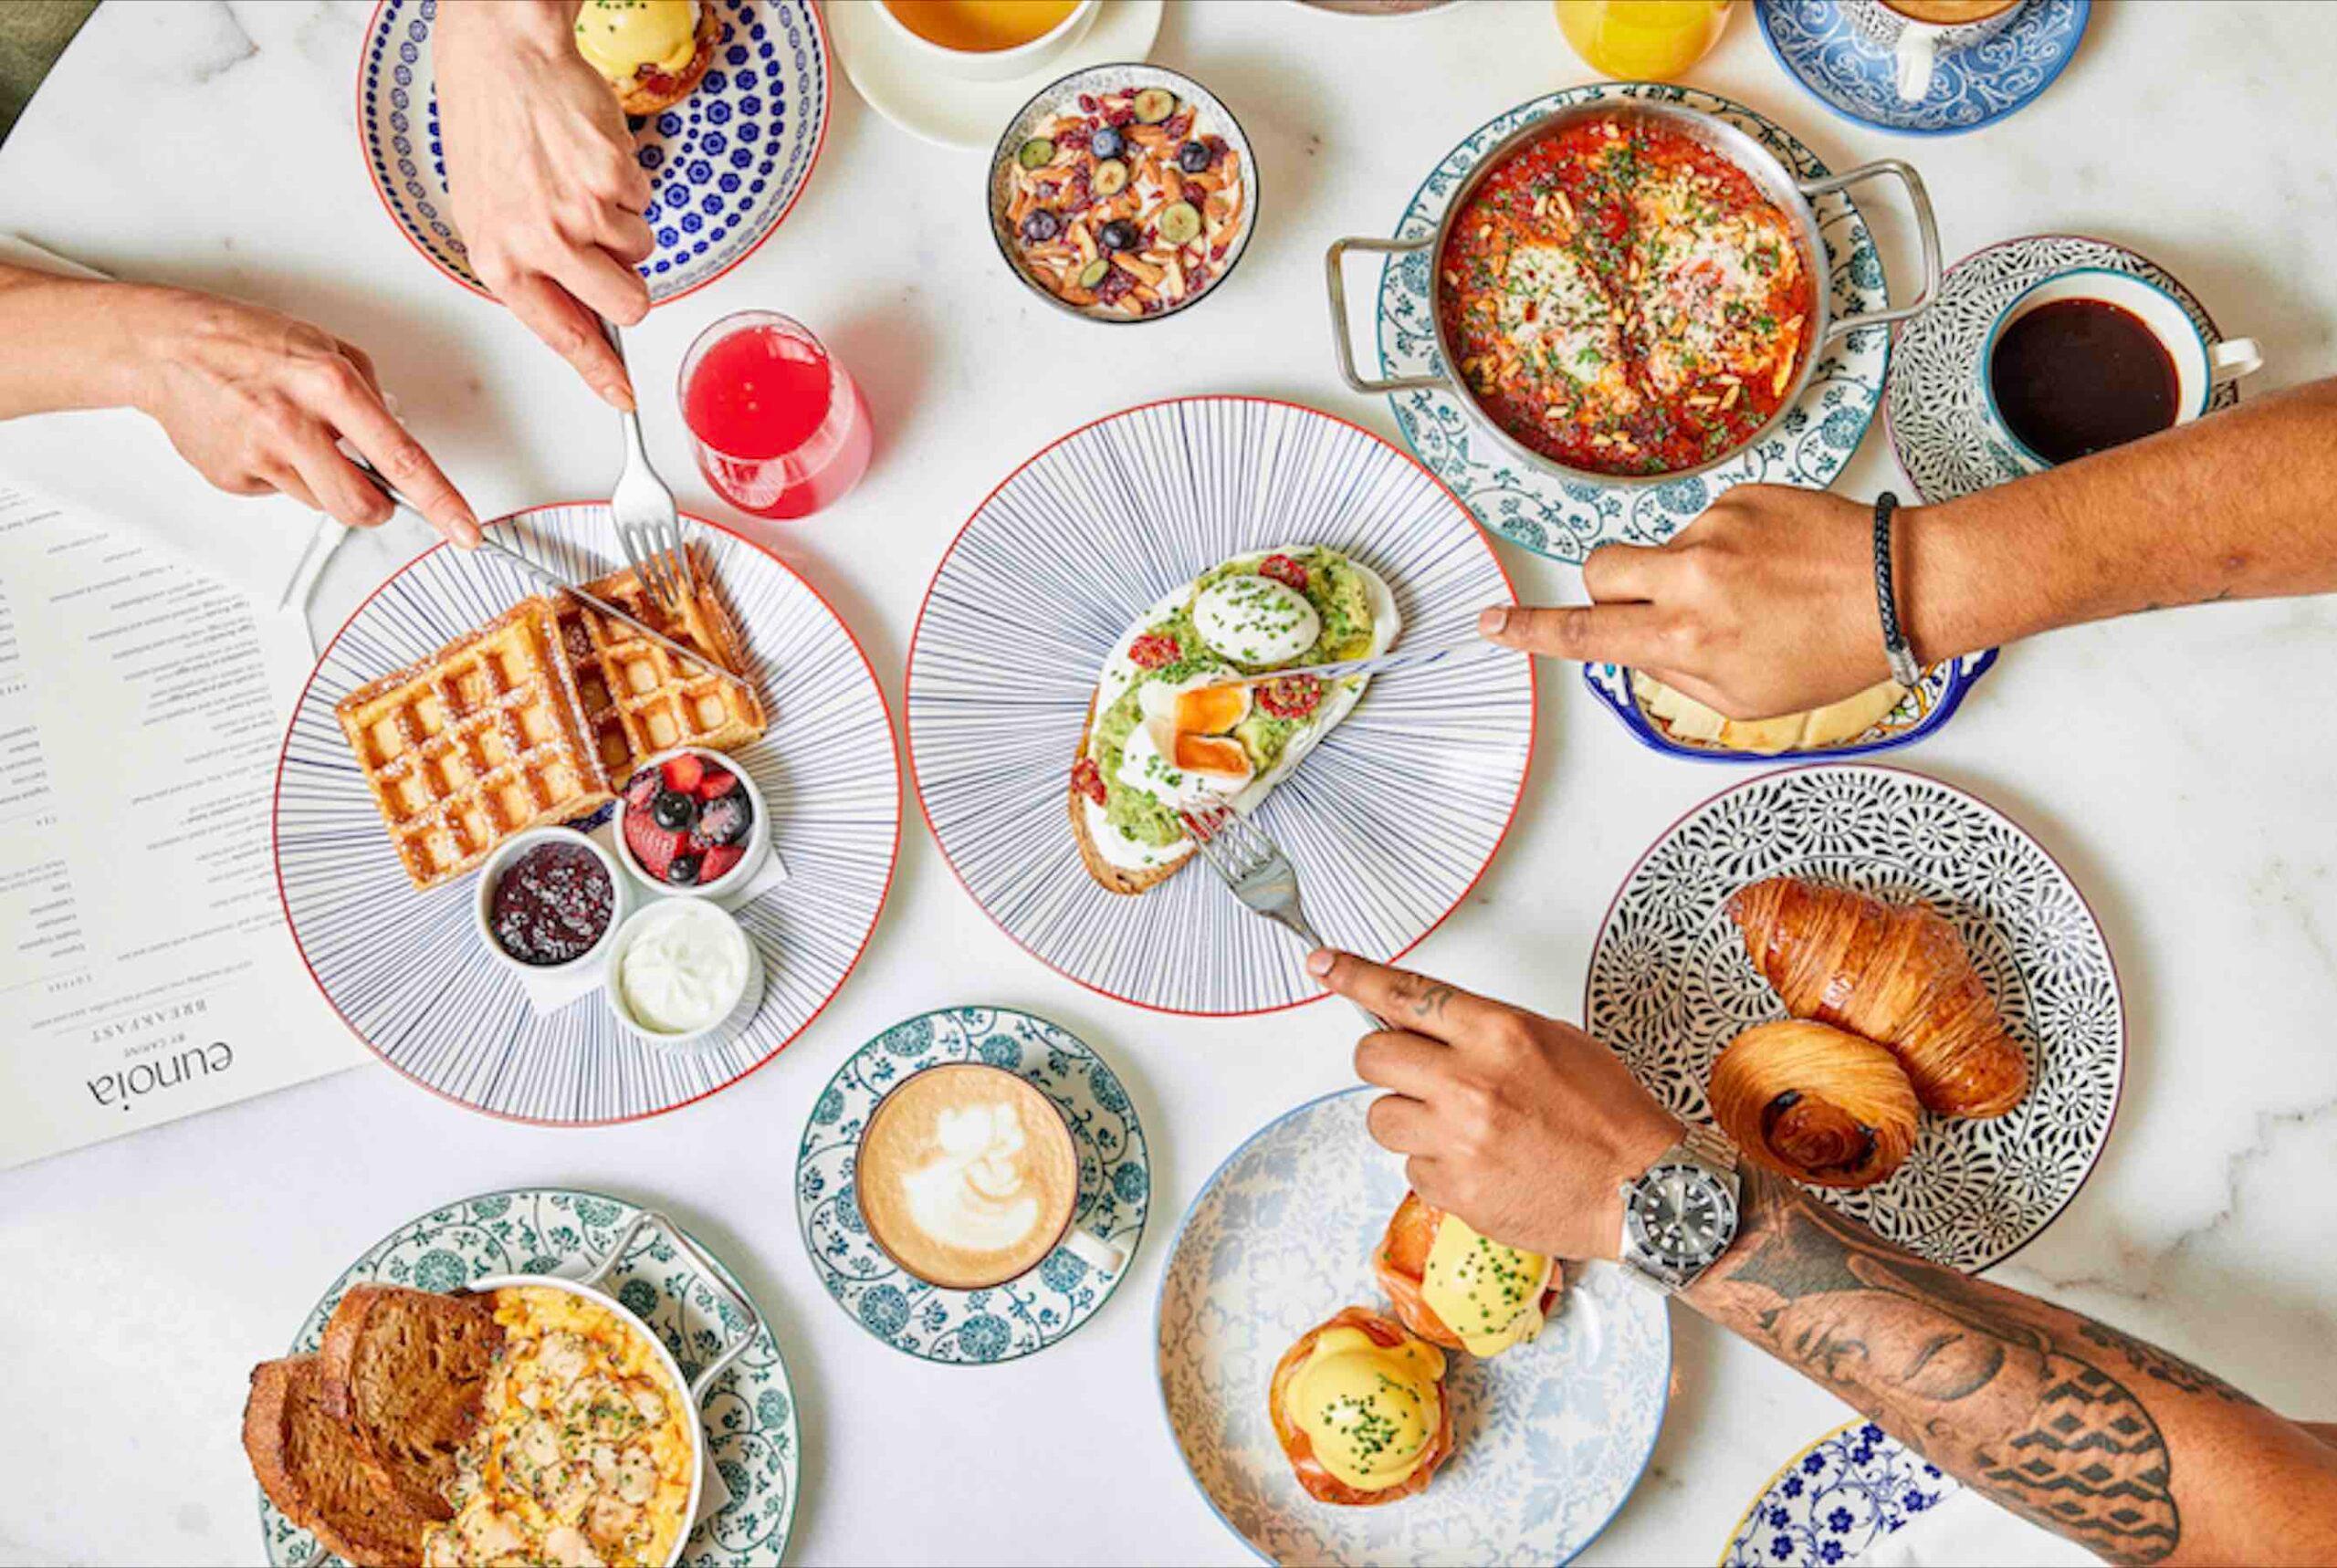 29 of the best breakfasts in Dubai: Croissants, crêpes and coffee